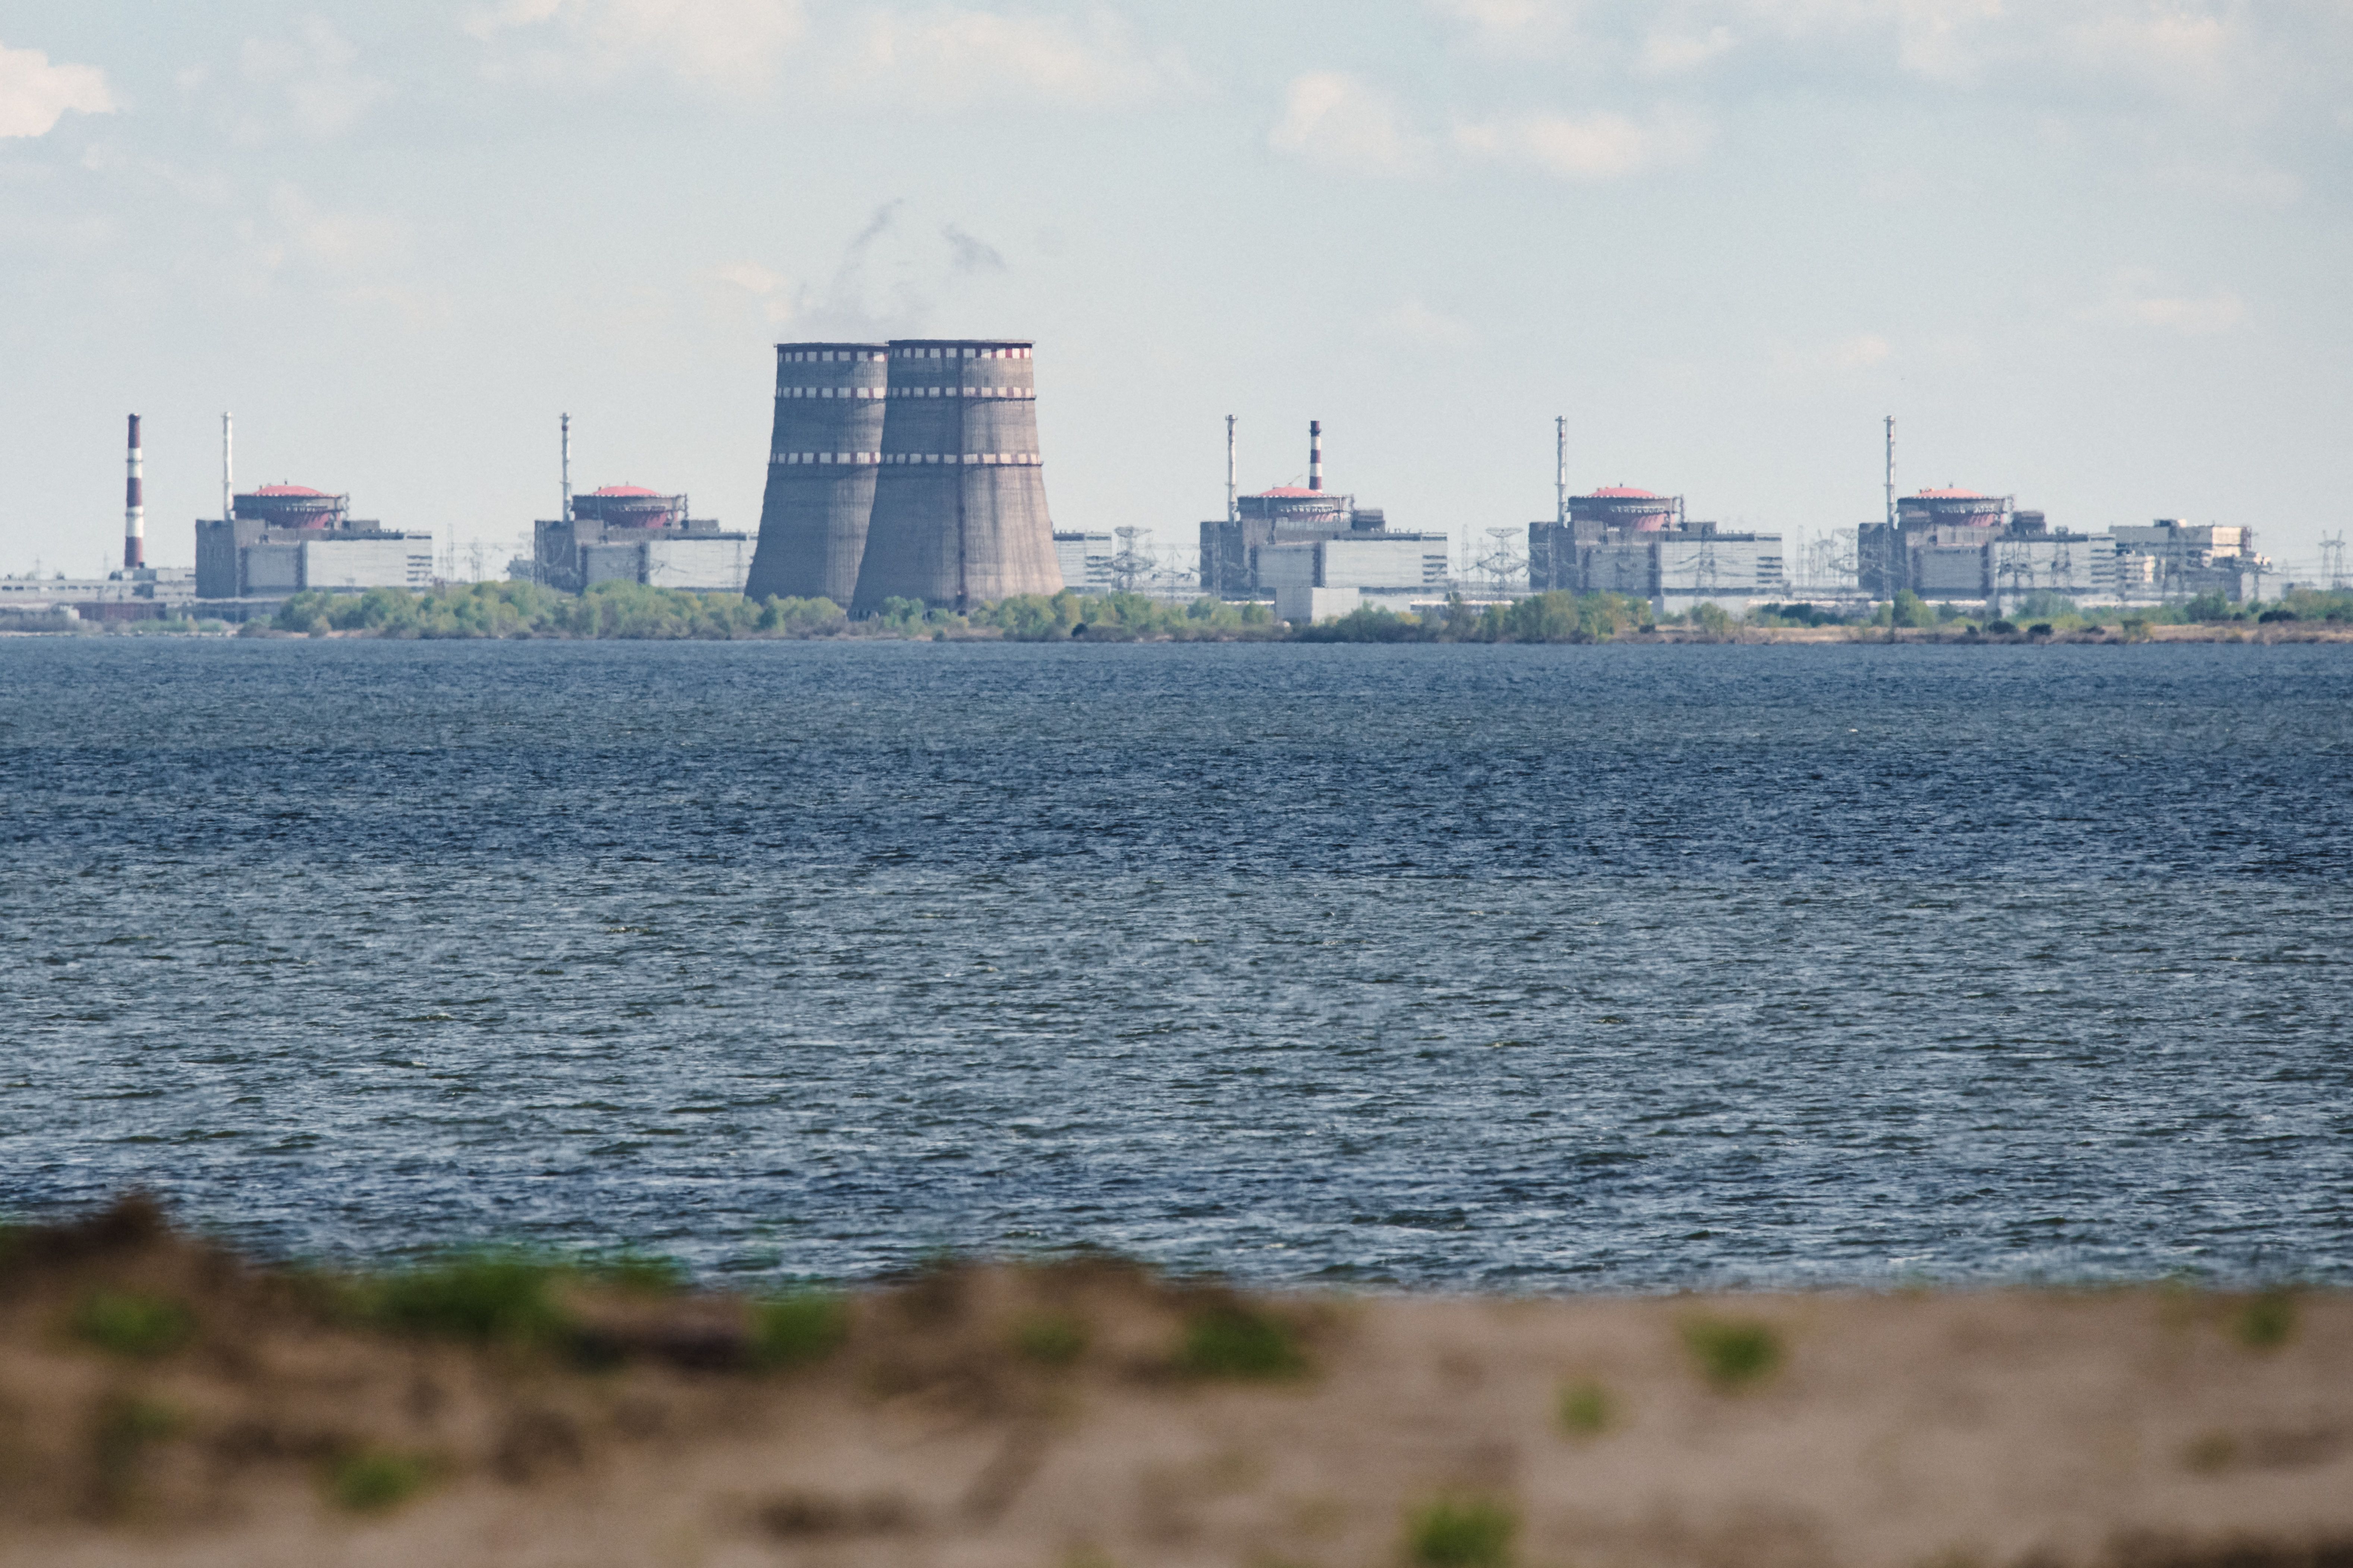 A general view shows the Zaporozhye nuclear power plant, located in the Russian-controlled zone of Energodar, as seen from Nikopol on April 27, 2022.